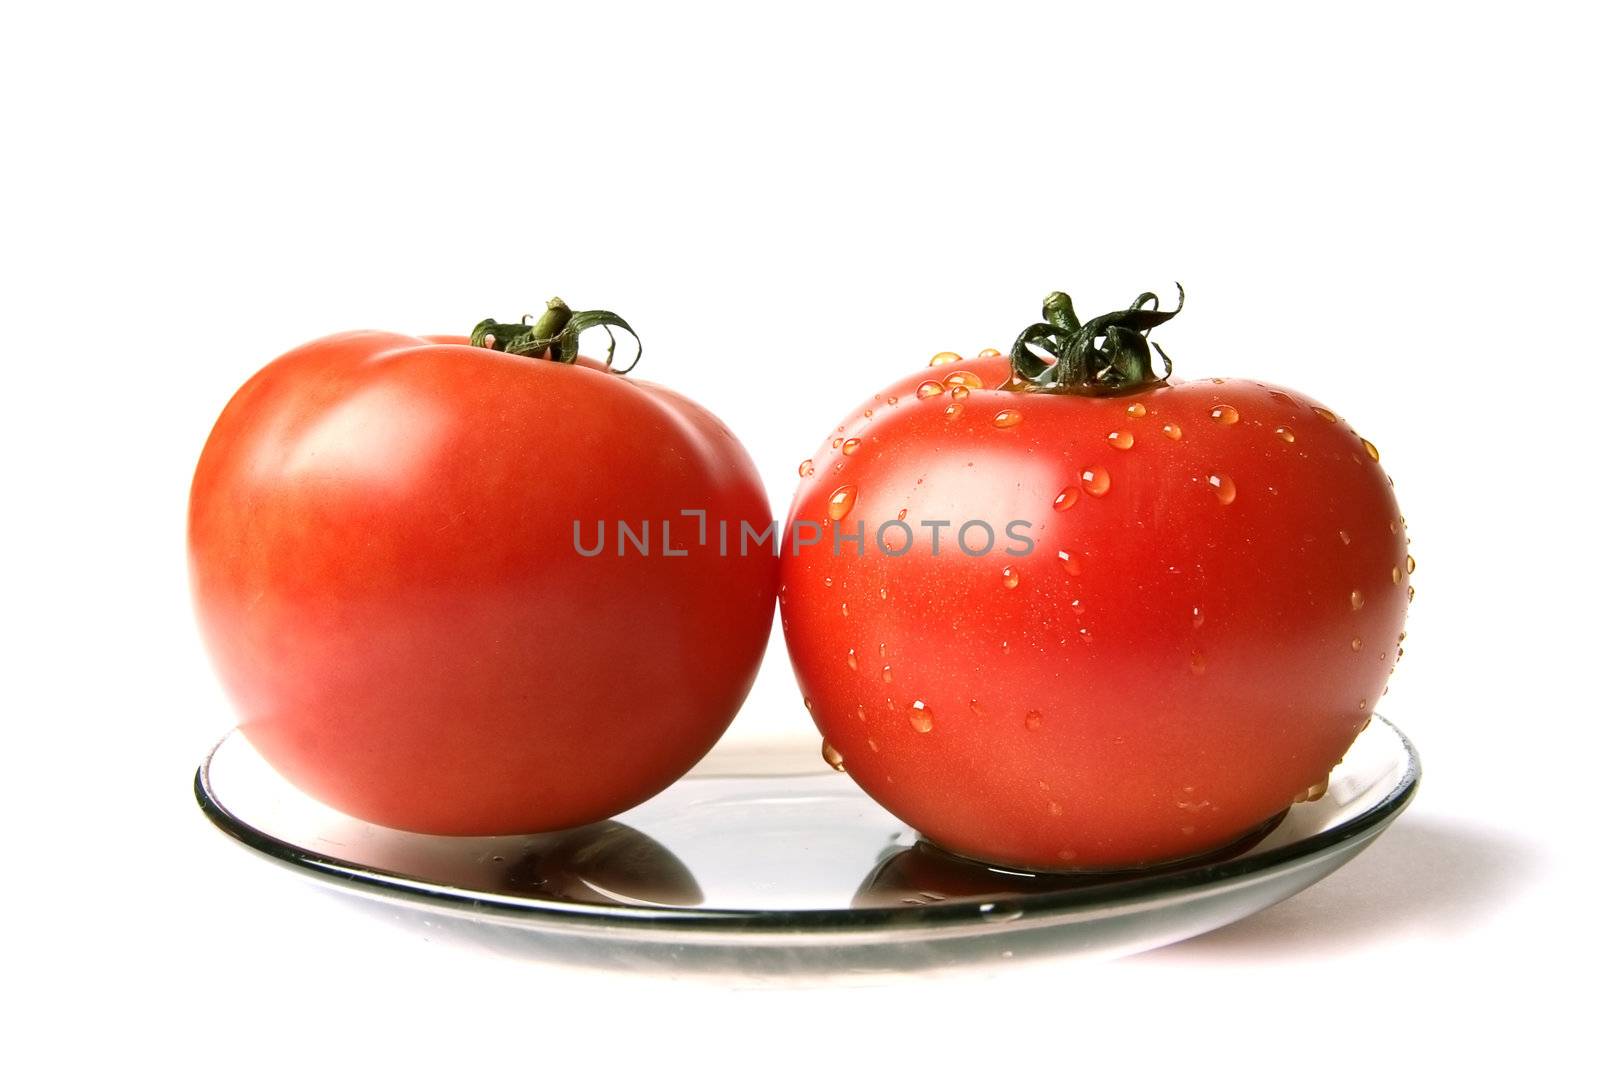 dry and wet tomatoes at the plate on a white background 